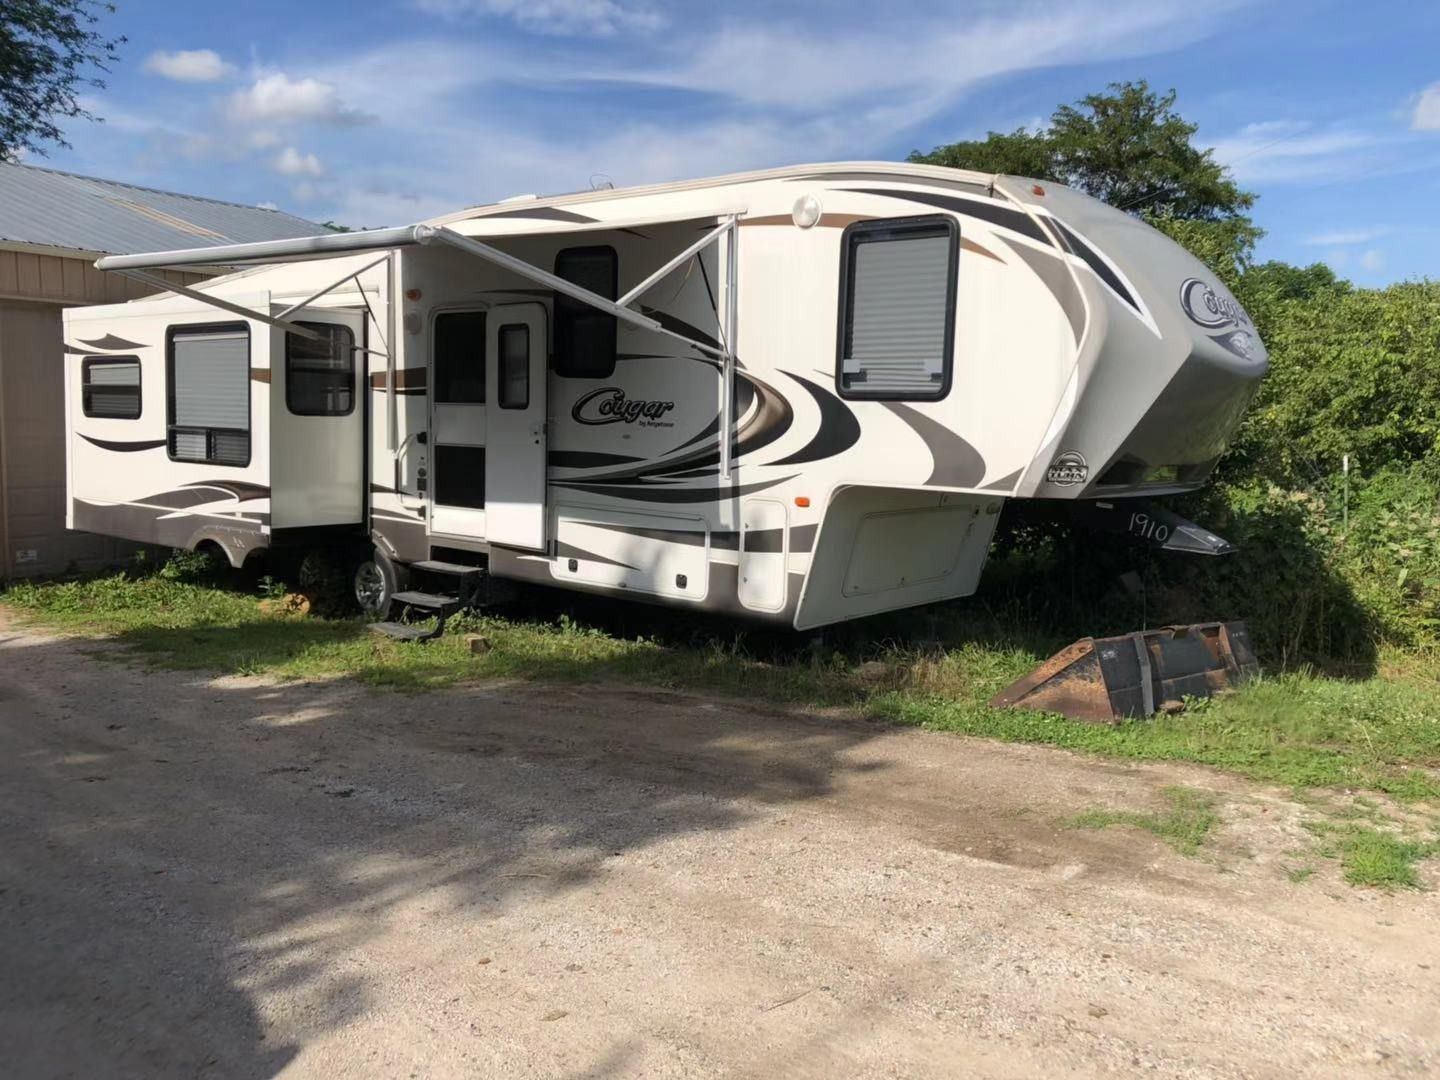 Good condition 2014 cougar fifth wheel camper for sale